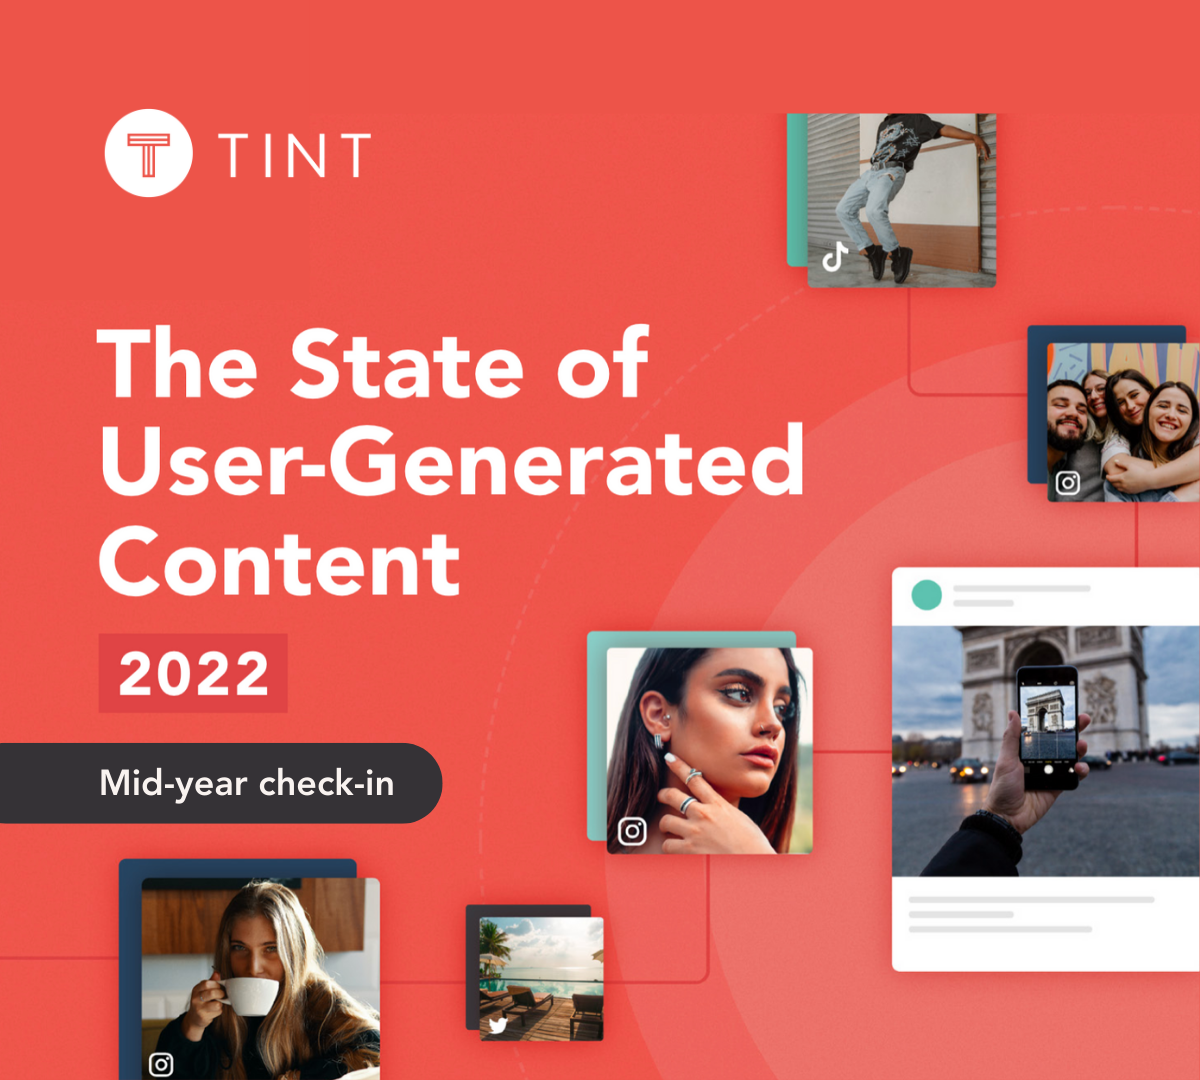 State of User-Generated Content 2022: Trends, and Predictions - Future Of TINT